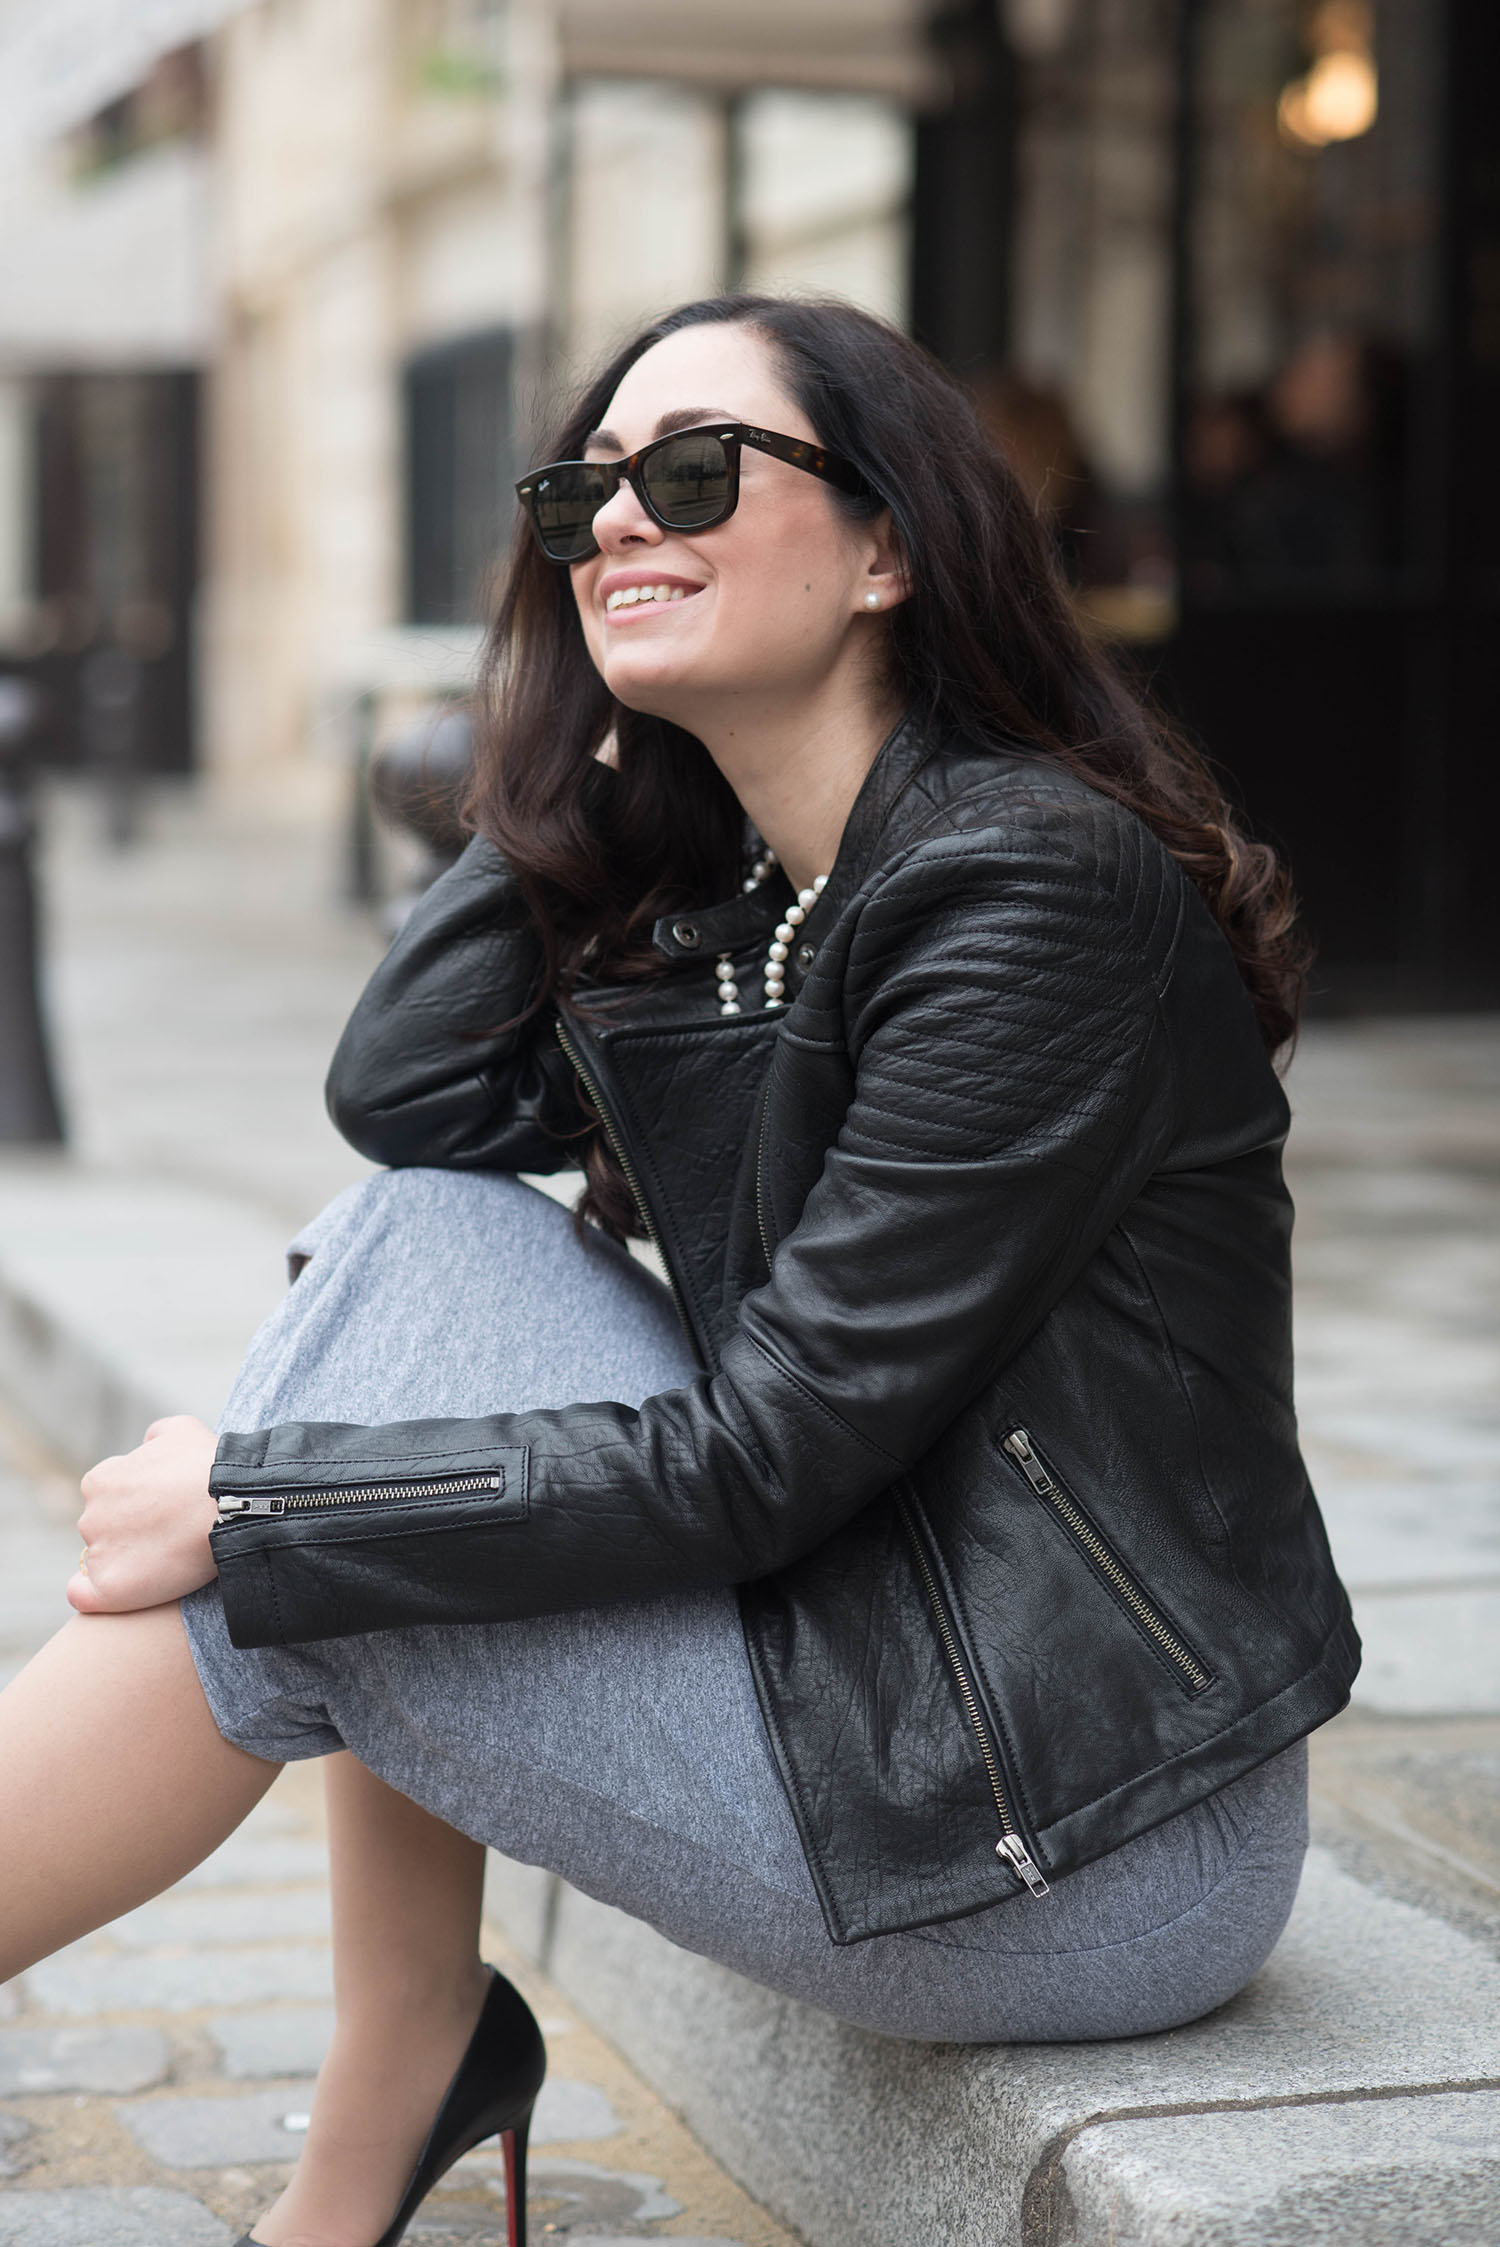 Portrait of Canadian fashion blogger Cee Fardoe of Coco & Vera at Place Dauphine in Paris, wearing a Cupcakes and Cashmere leather jacket and Rayban Wayfarer sunglasses